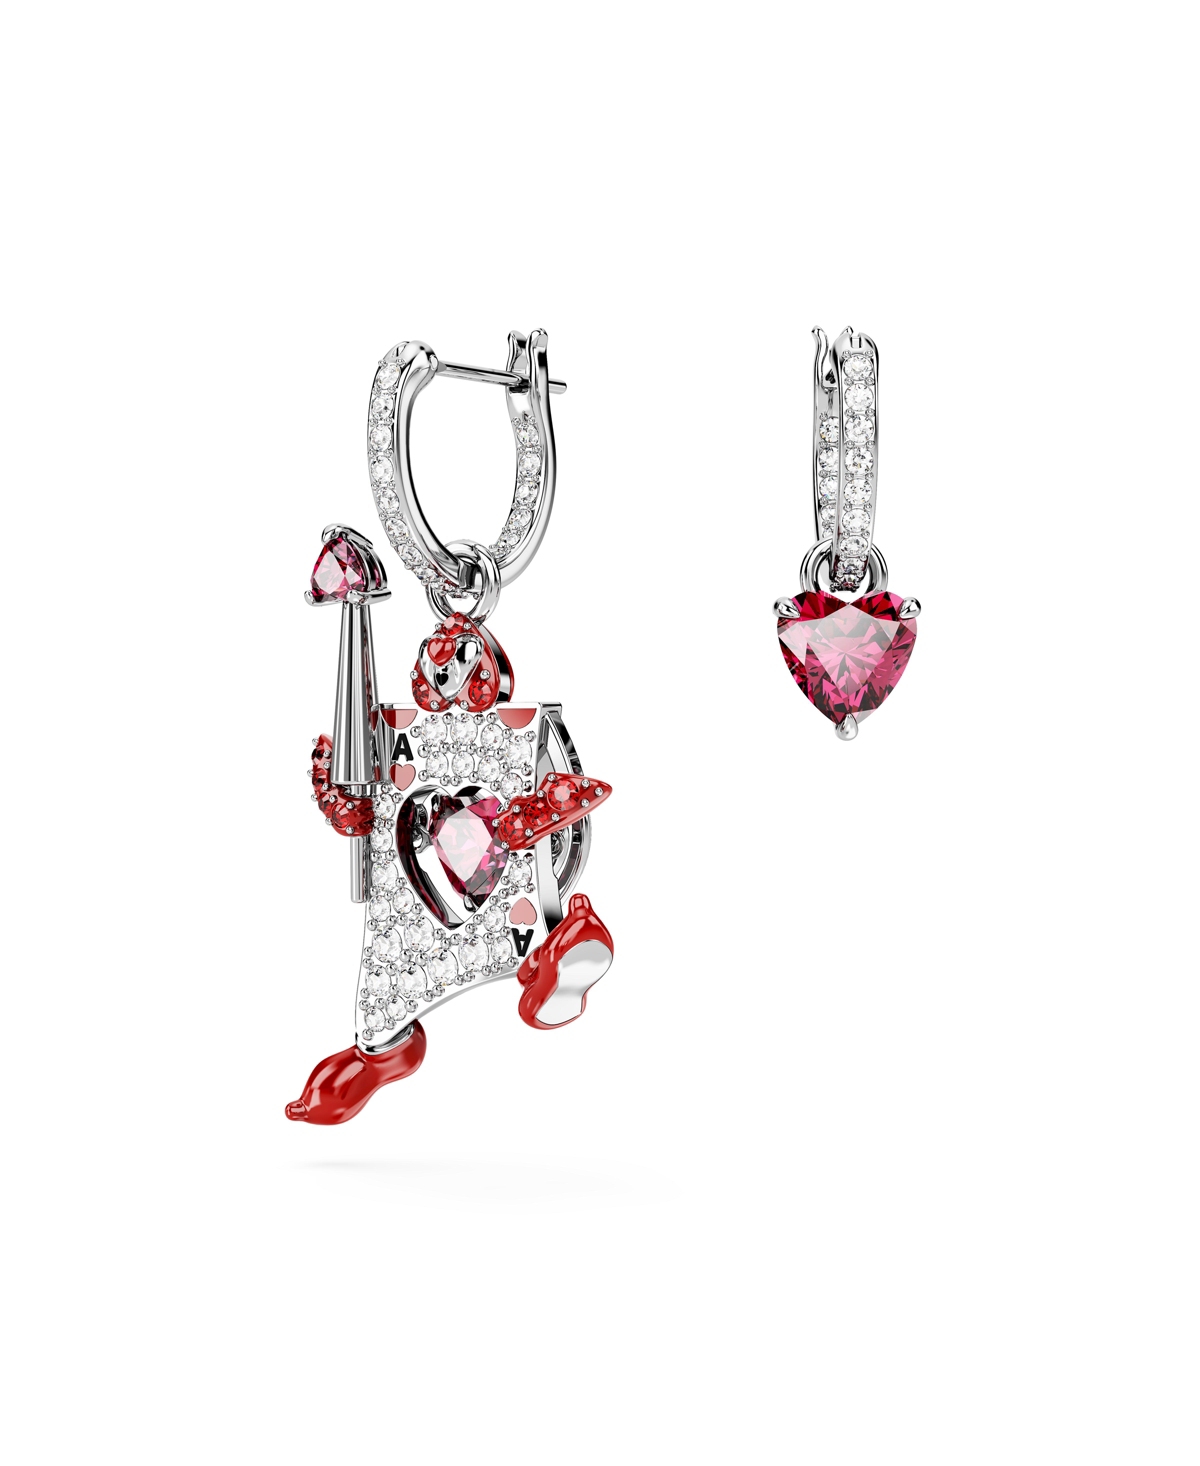 Swarovski Asymmetrical Design, Playing Card, Red, Rhodium Plated Alice In Wonderland Drop Earrings In Multicolored